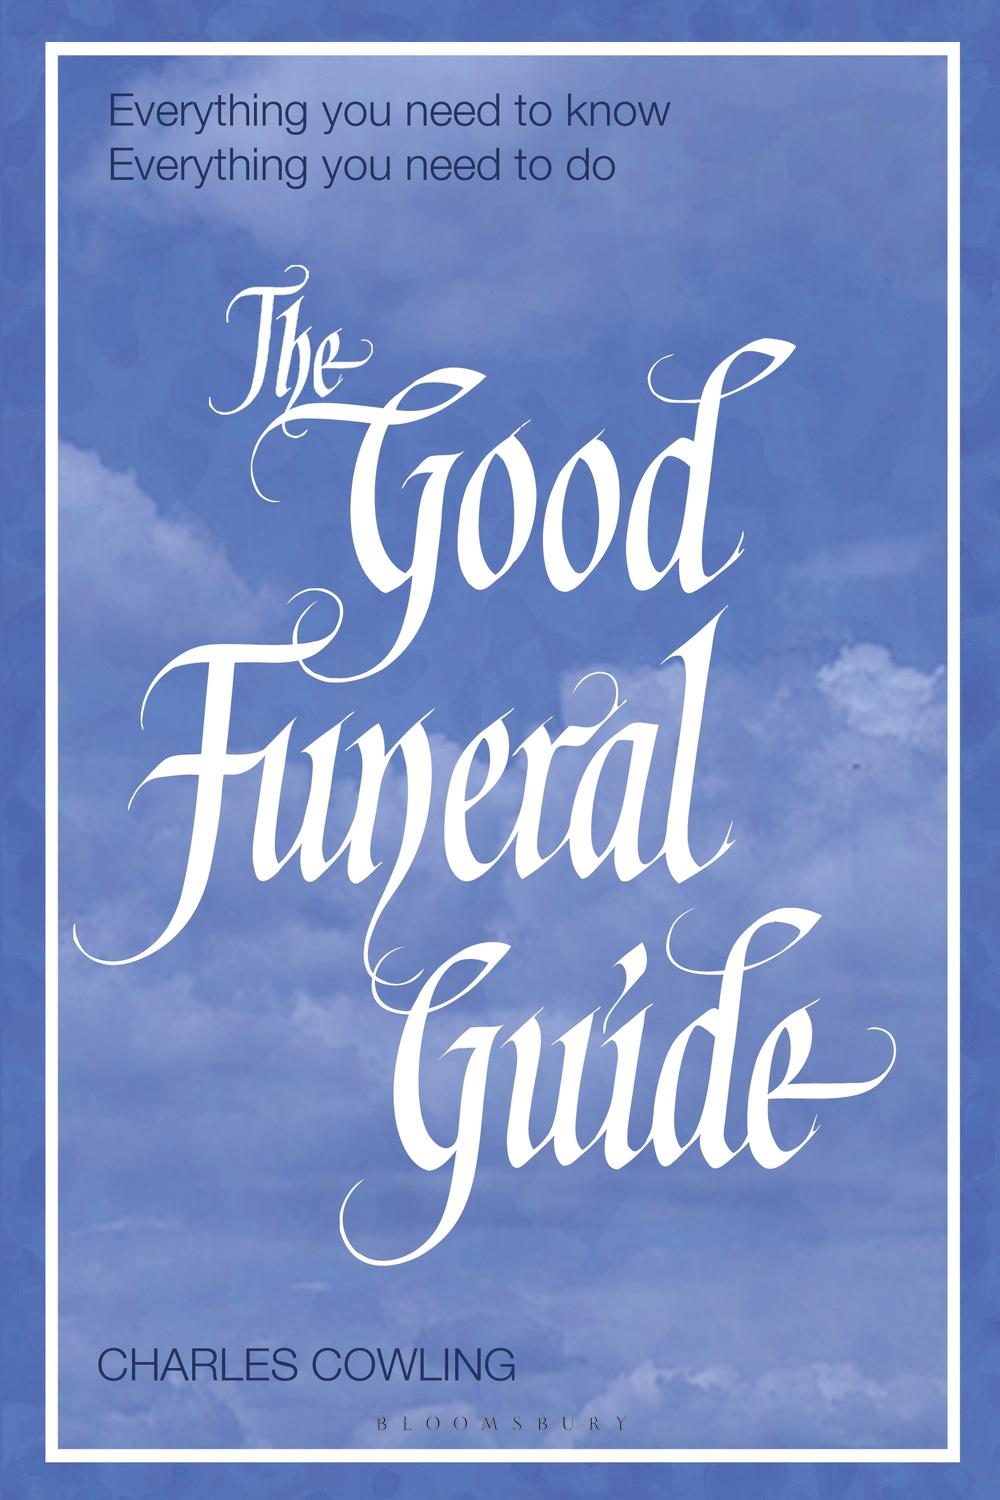 Good Funeral Guide - Charles Cowling